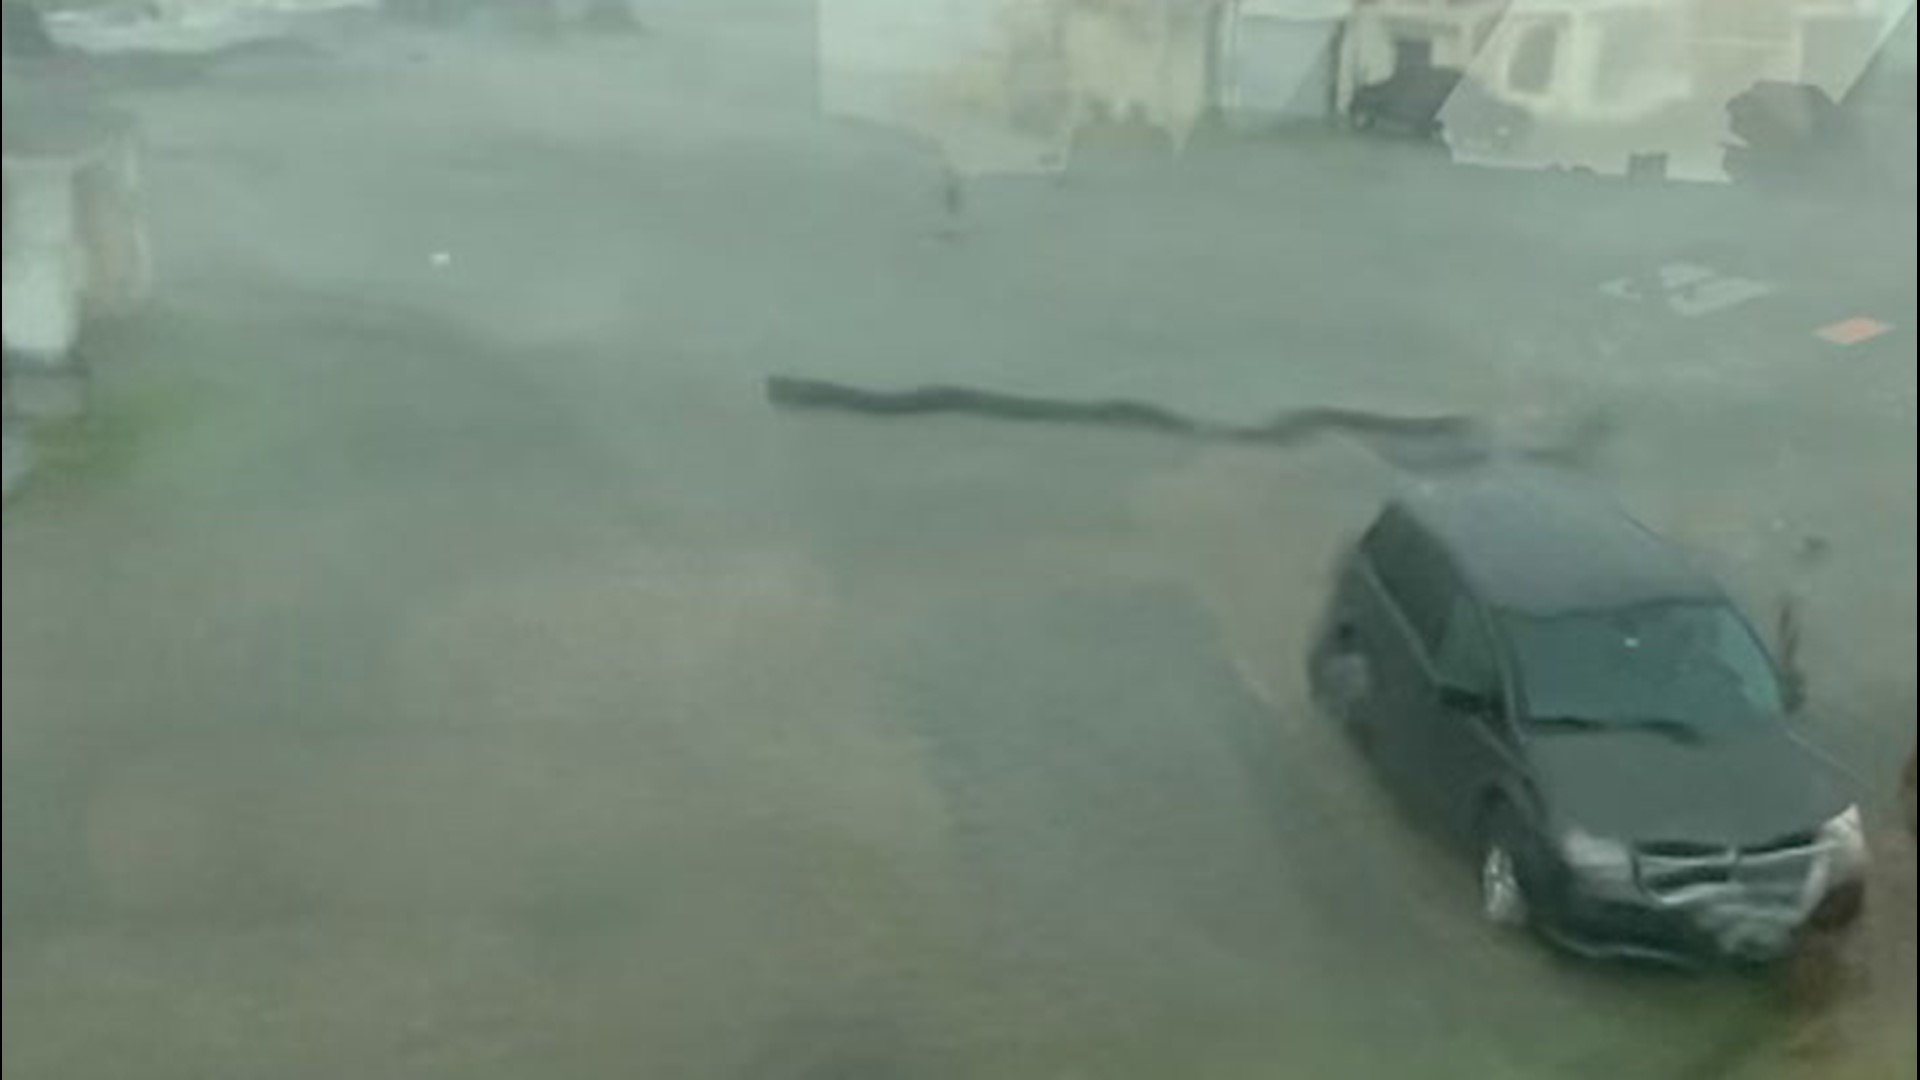 Strong winds came through Grand Isle, Louisiana, during a severe storm on the afternoon of April 13. Wind gusts were reported to be over 75 miles per hour.